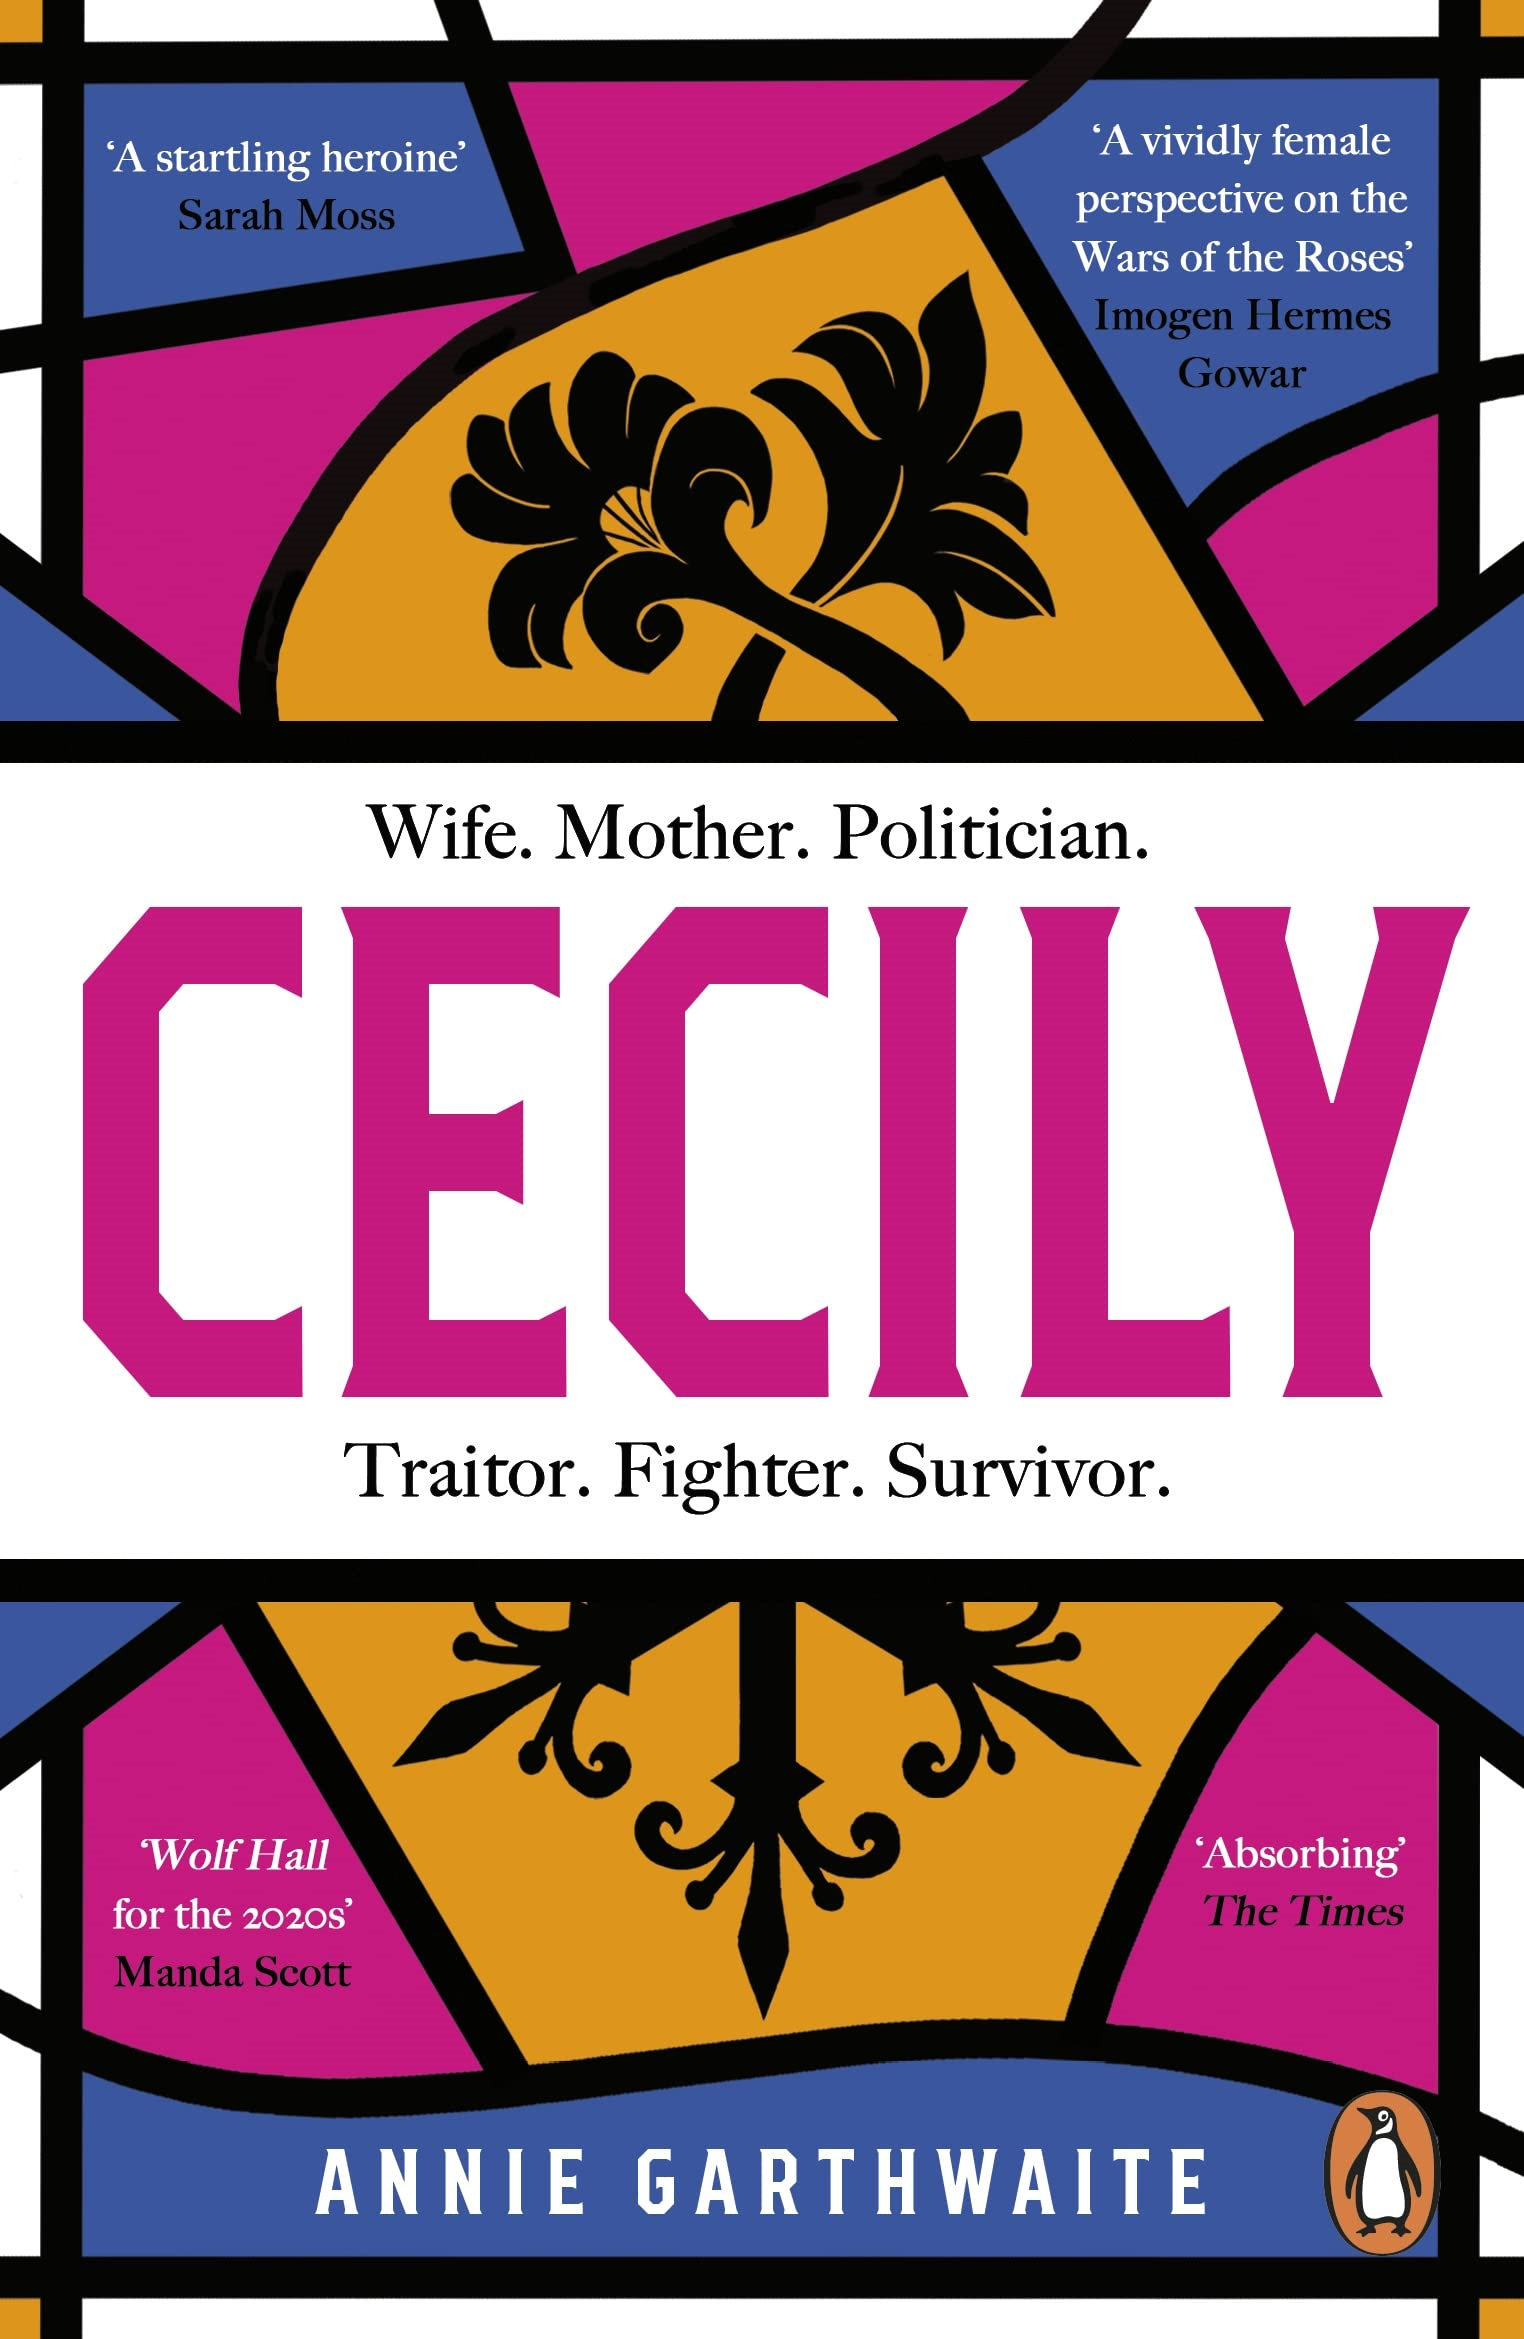 Cecily: An Epic Feminist Retelling Of The War Of The Roses